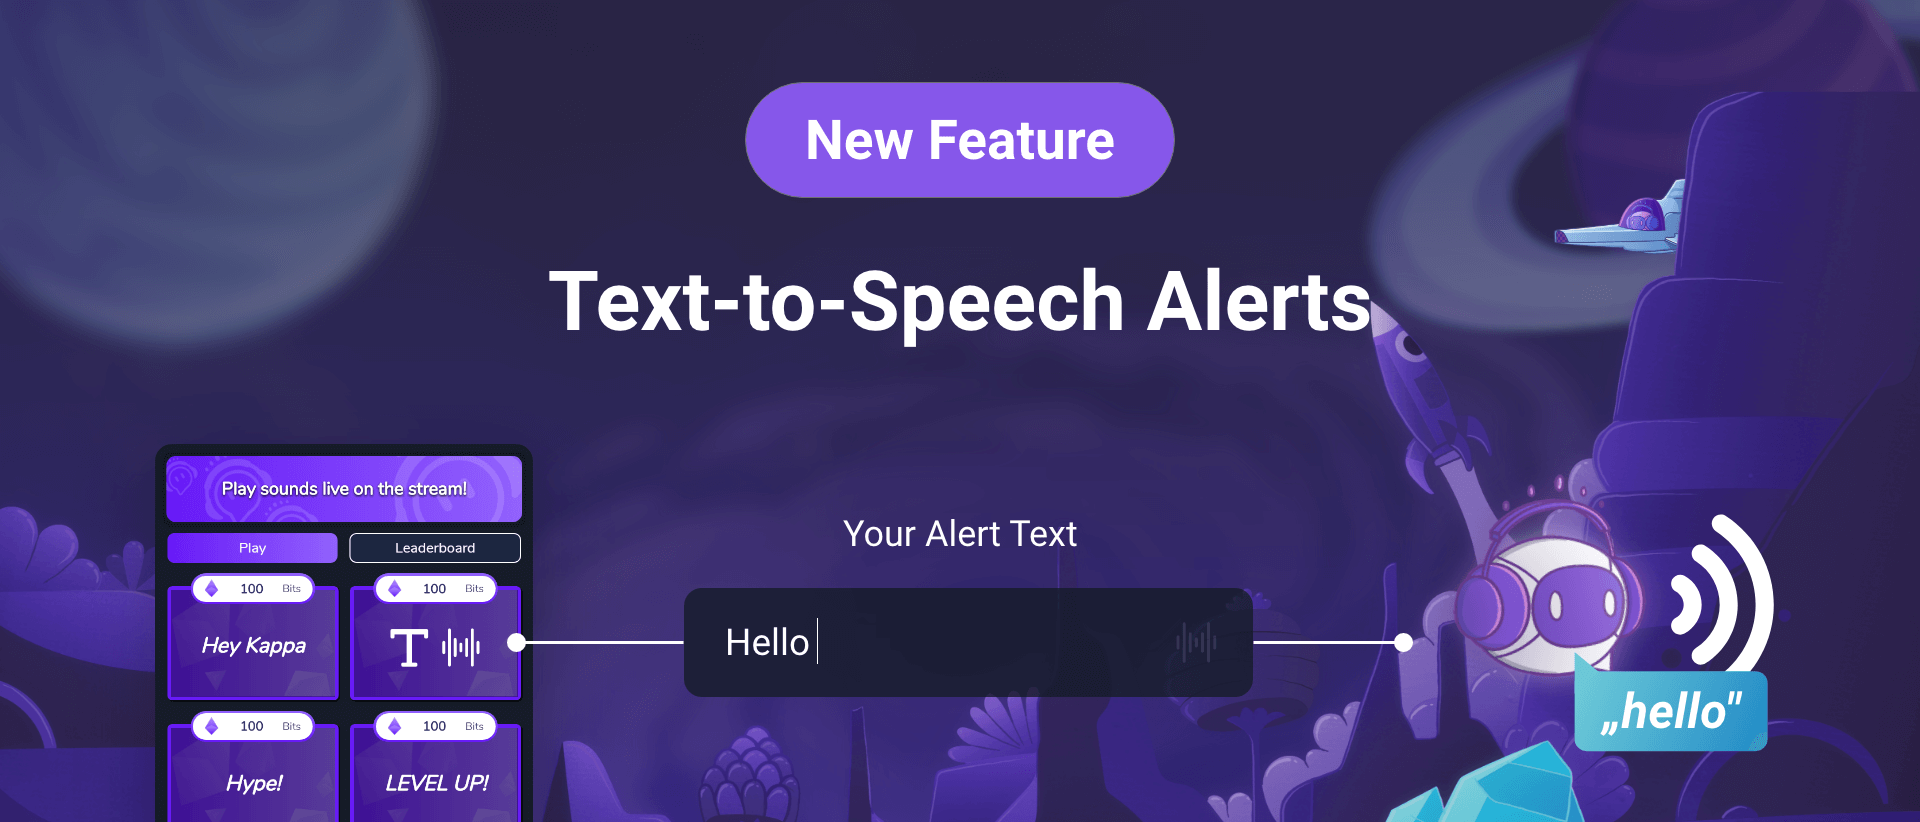 New Feature: Text-to-Speech Alerts in the Sound Alerts Twitch Extension -  Sound Alerts